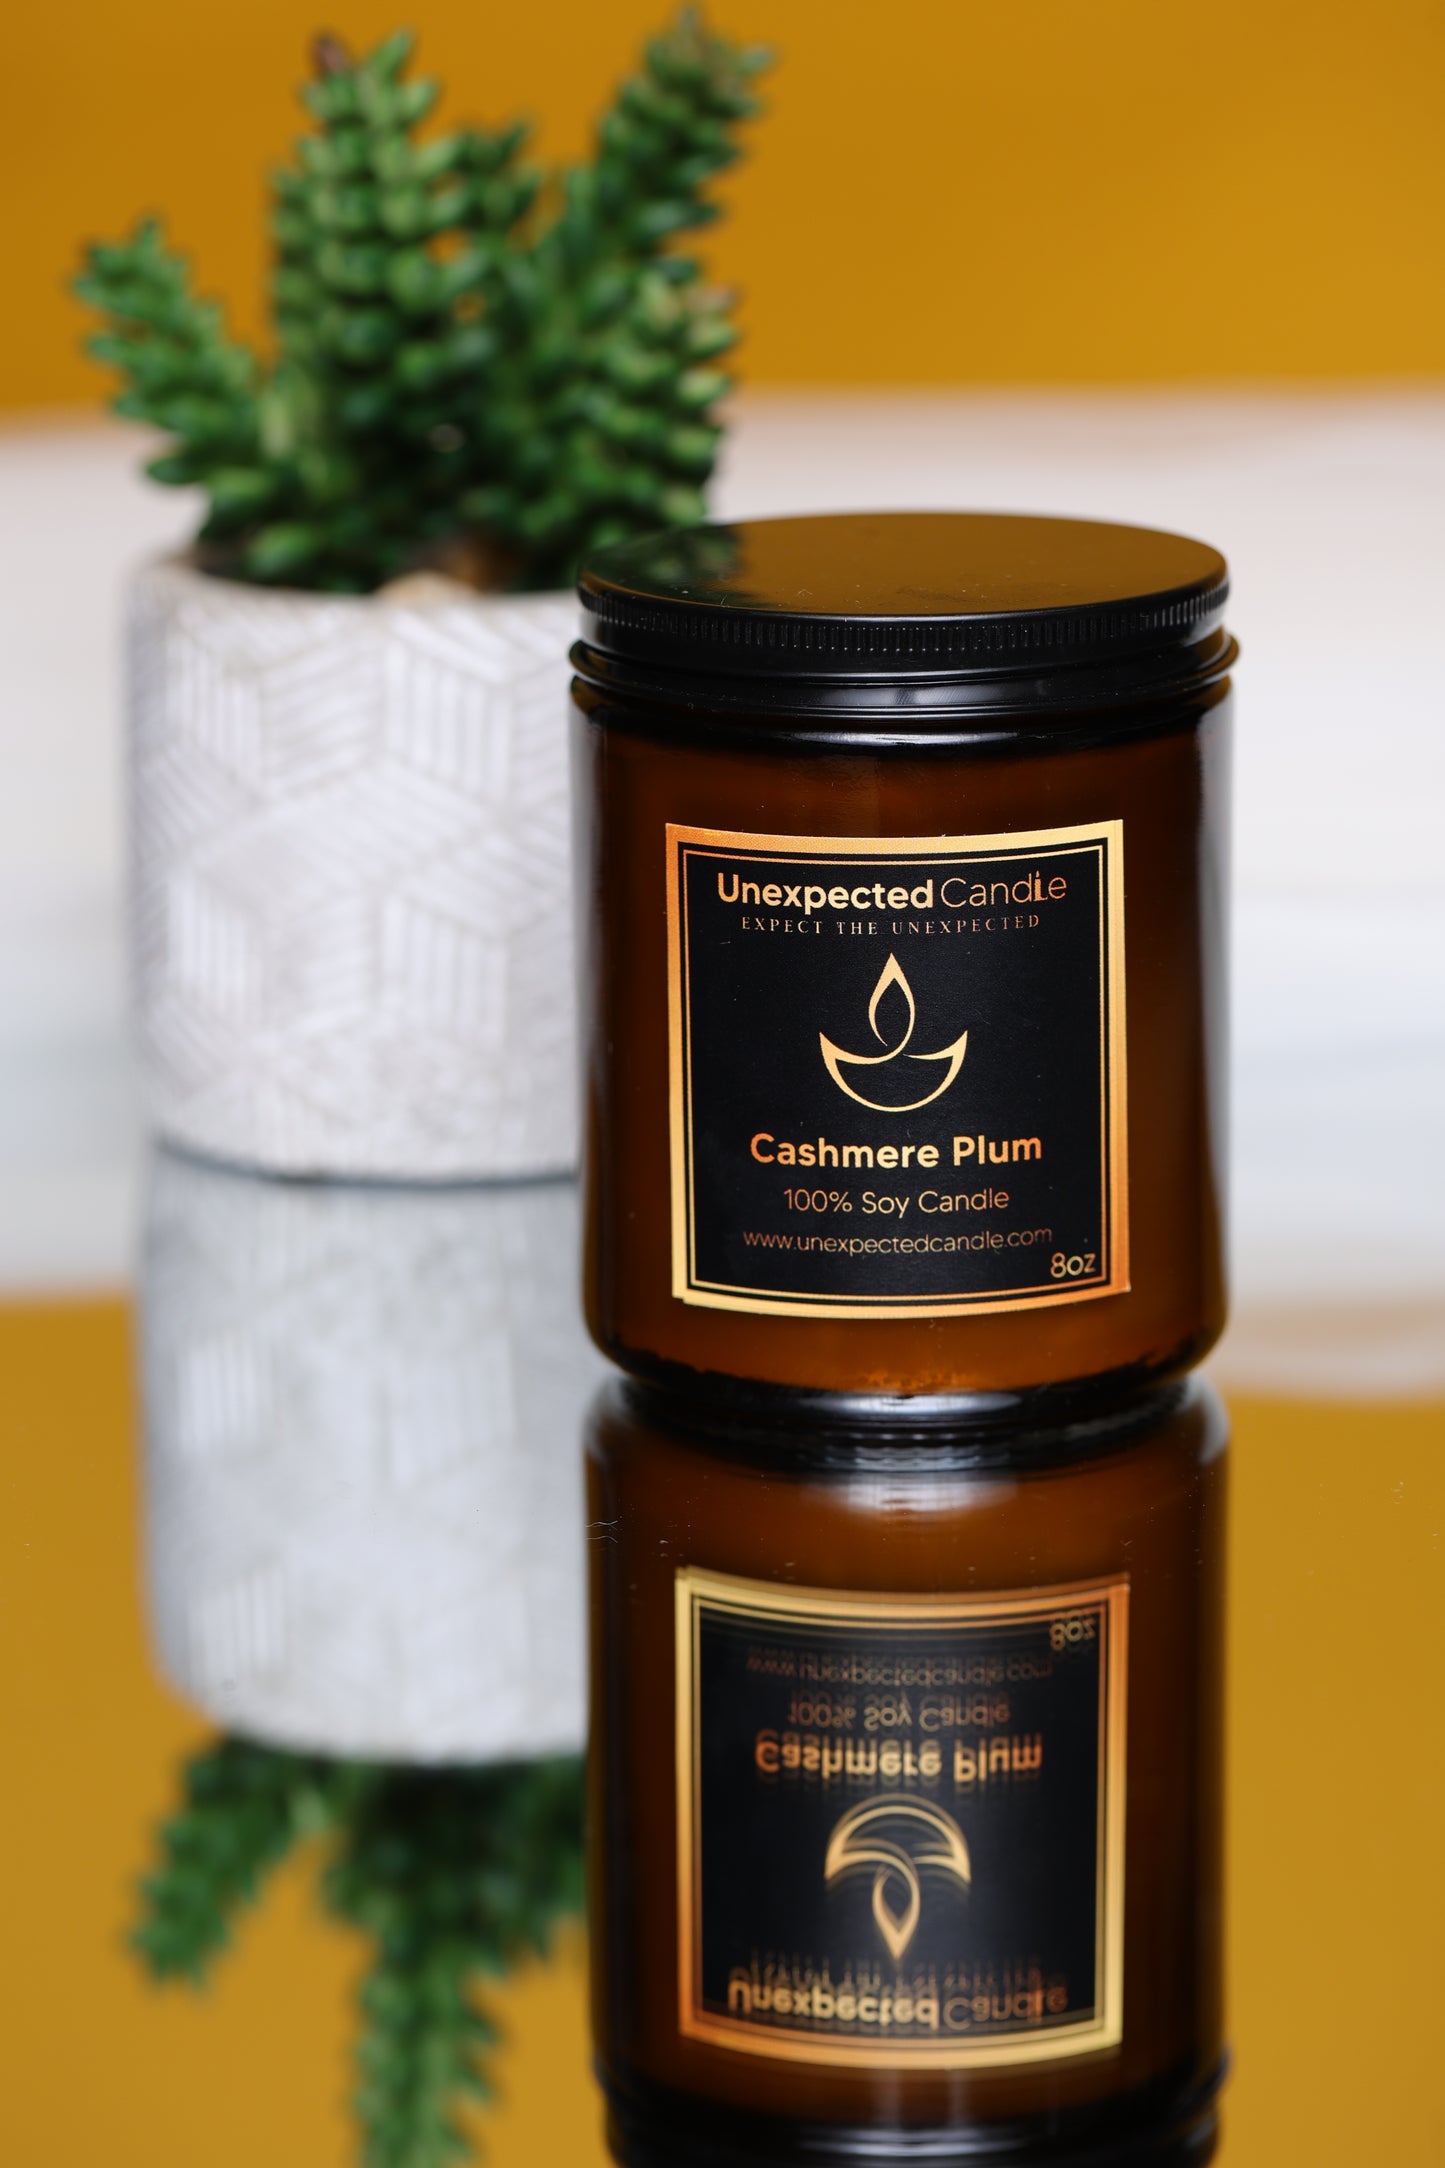 Cashmere Glow Hand Poured Candles – Thread & Ember